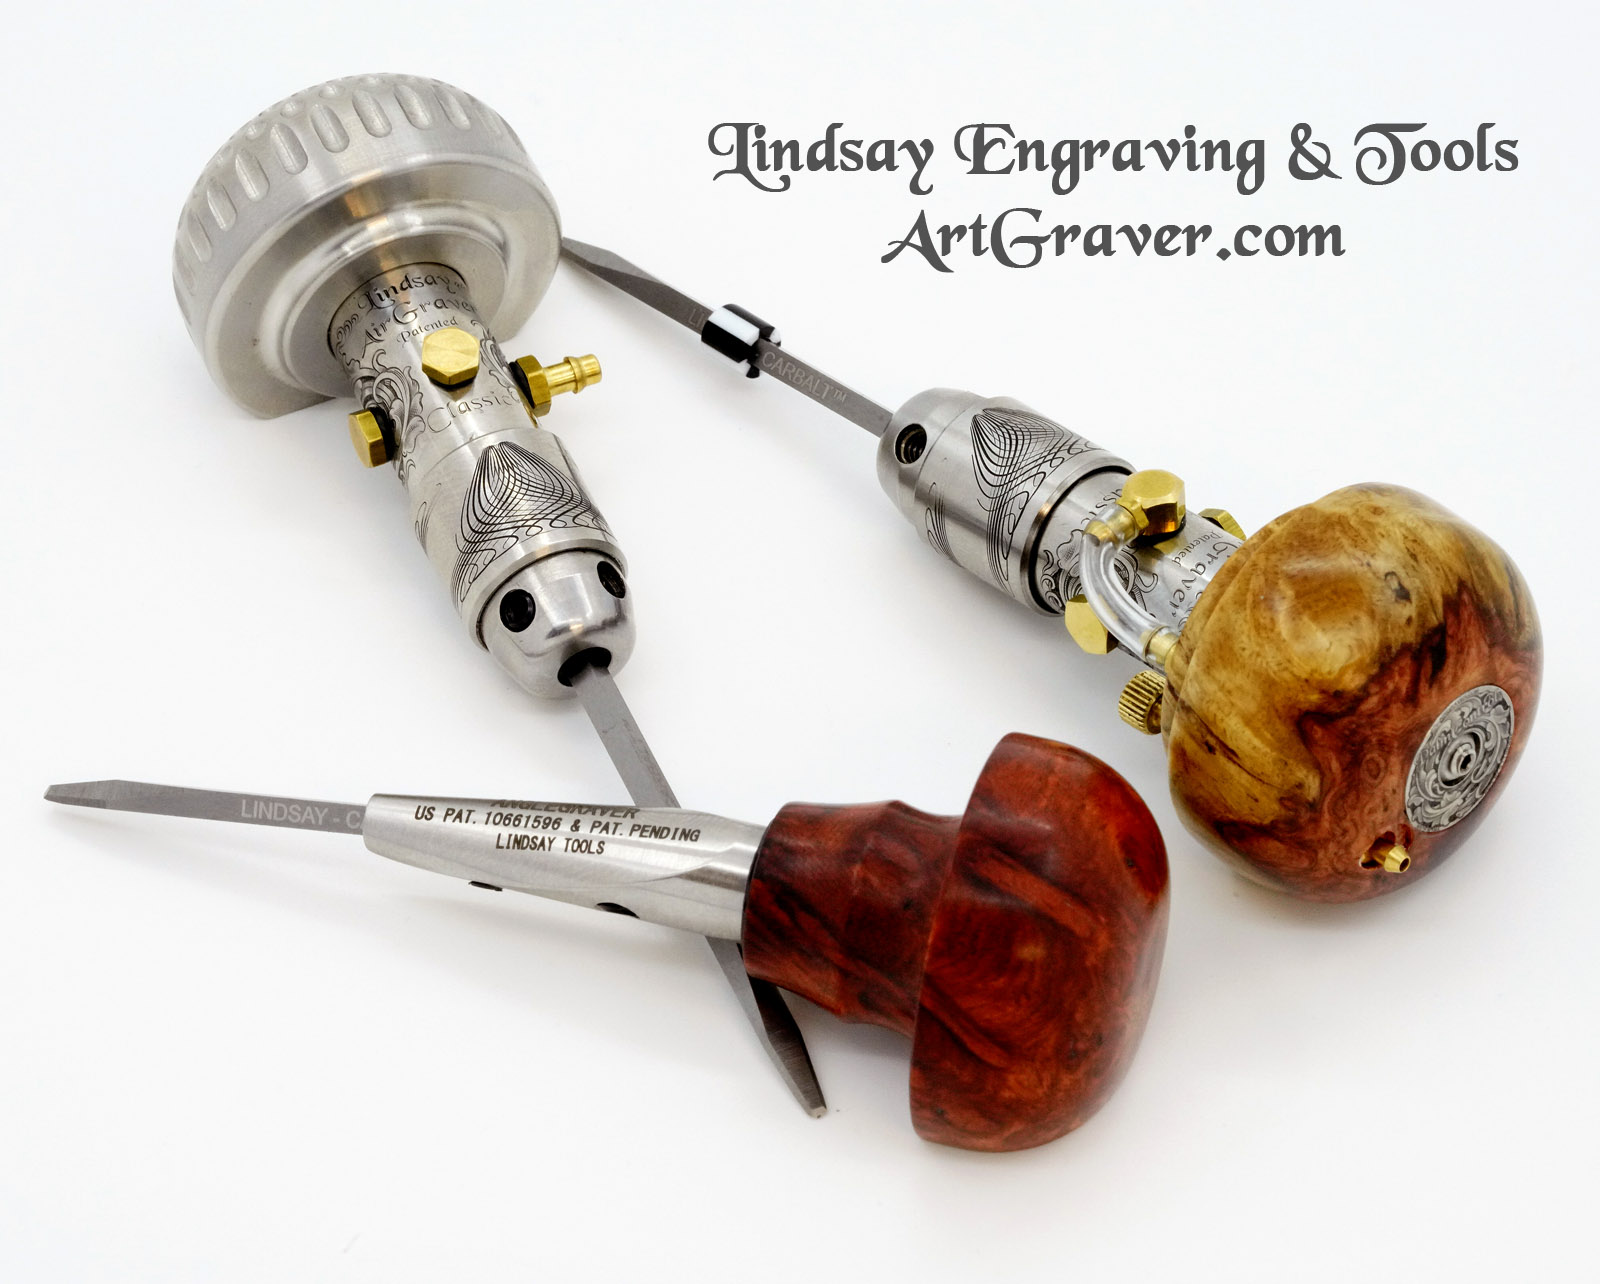 HAND ENGRAVING TOOLS AND HAND ENGRAVING EQUIPMENT FOR JEWELERS AND ARTISTS.  Learn to hand engrave with the patented Lindsay AirGraver Engraving Tools  for Hand Engravers, Jewelers and Artists ~ Steve Lindsay